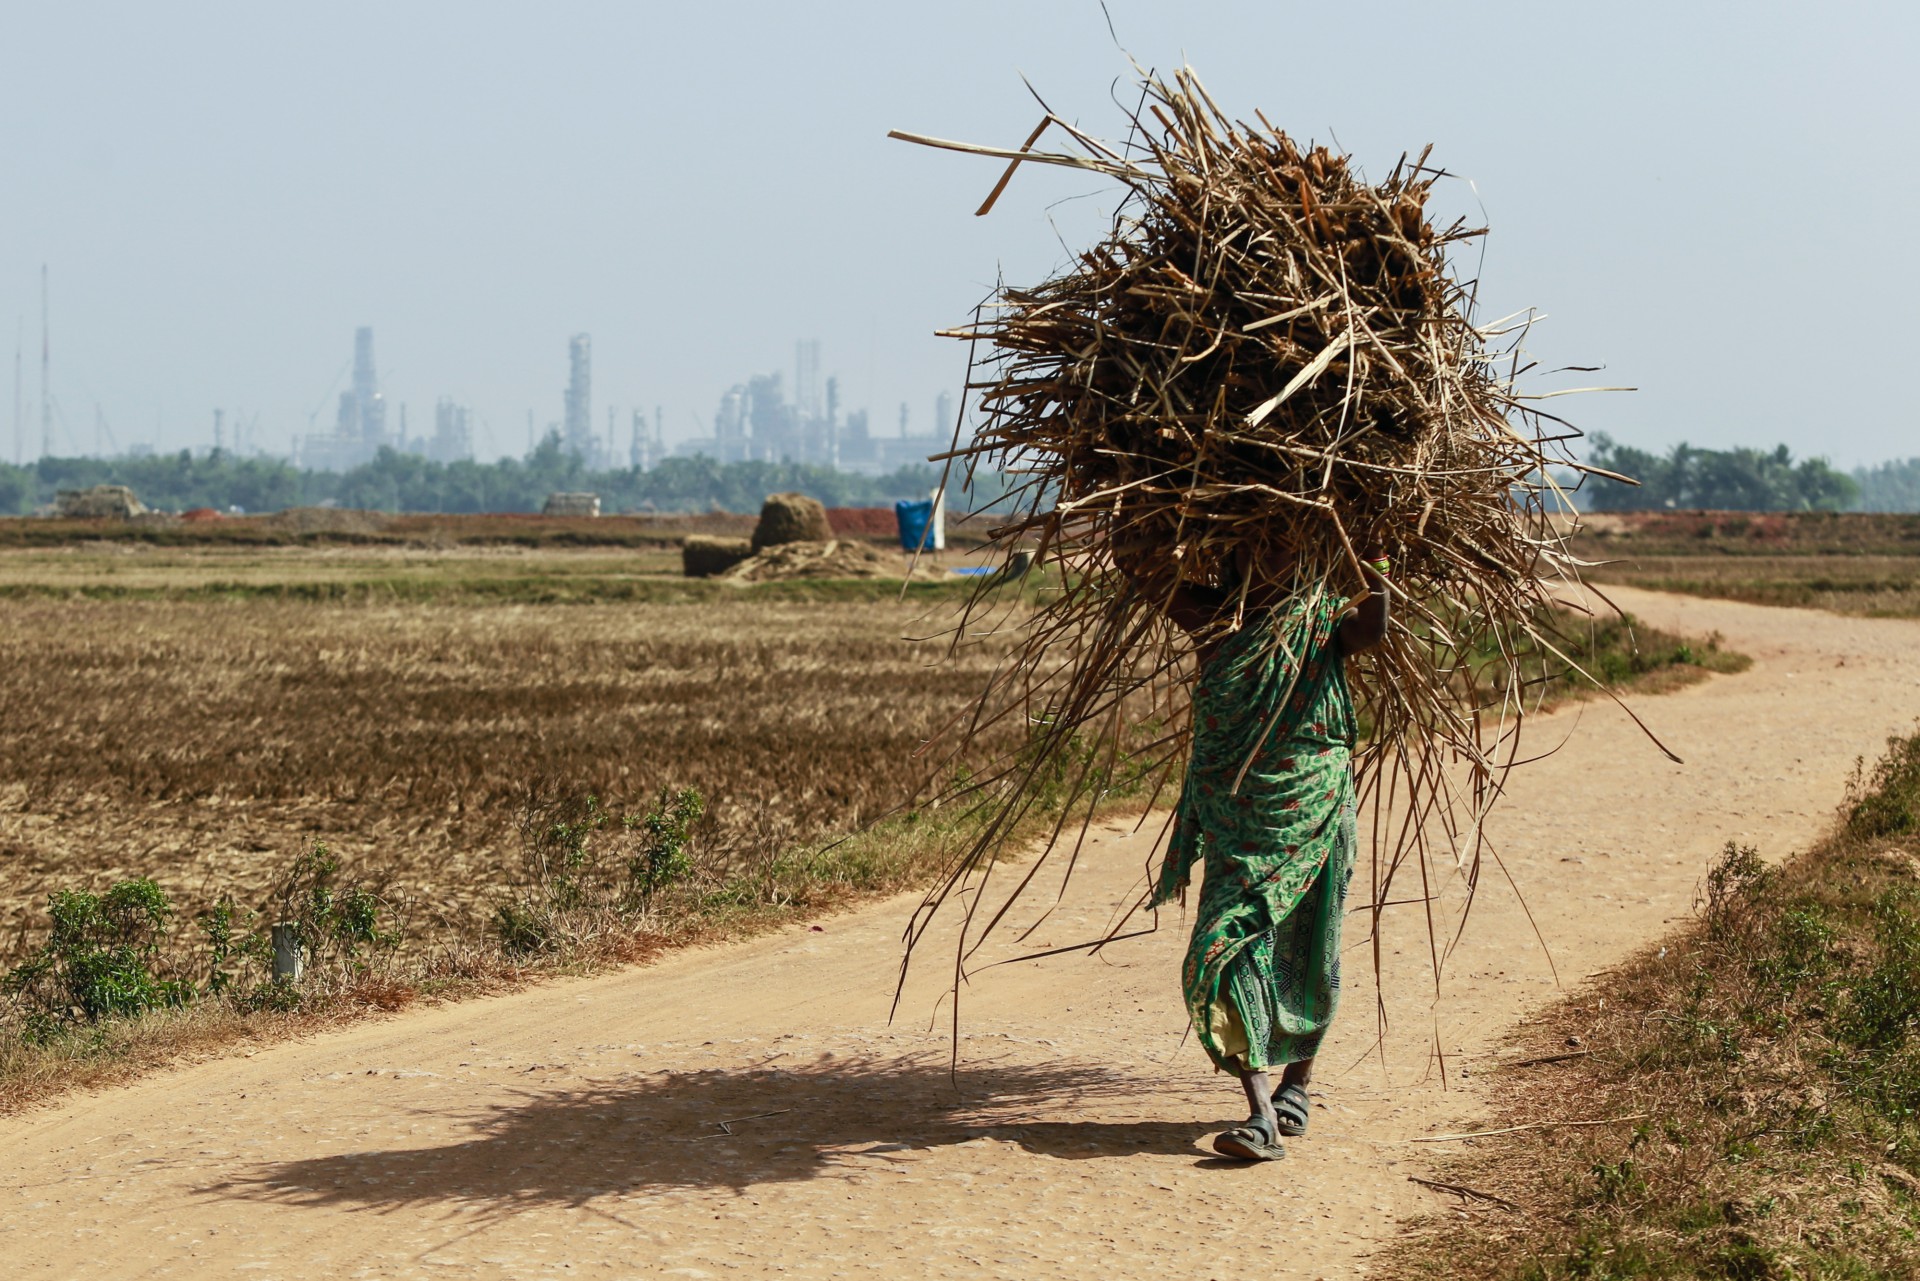 A woman Carries a bundle of dried grass along a road through which a proposed Railway will pass through Dhinkia, Odisha, India, on Sunday, Jan 19, 2014. POSCO may soon start Construction on a steel complex in the area.
Foto: Prashanth Vishwanathan/Bloomberg via Getty Images